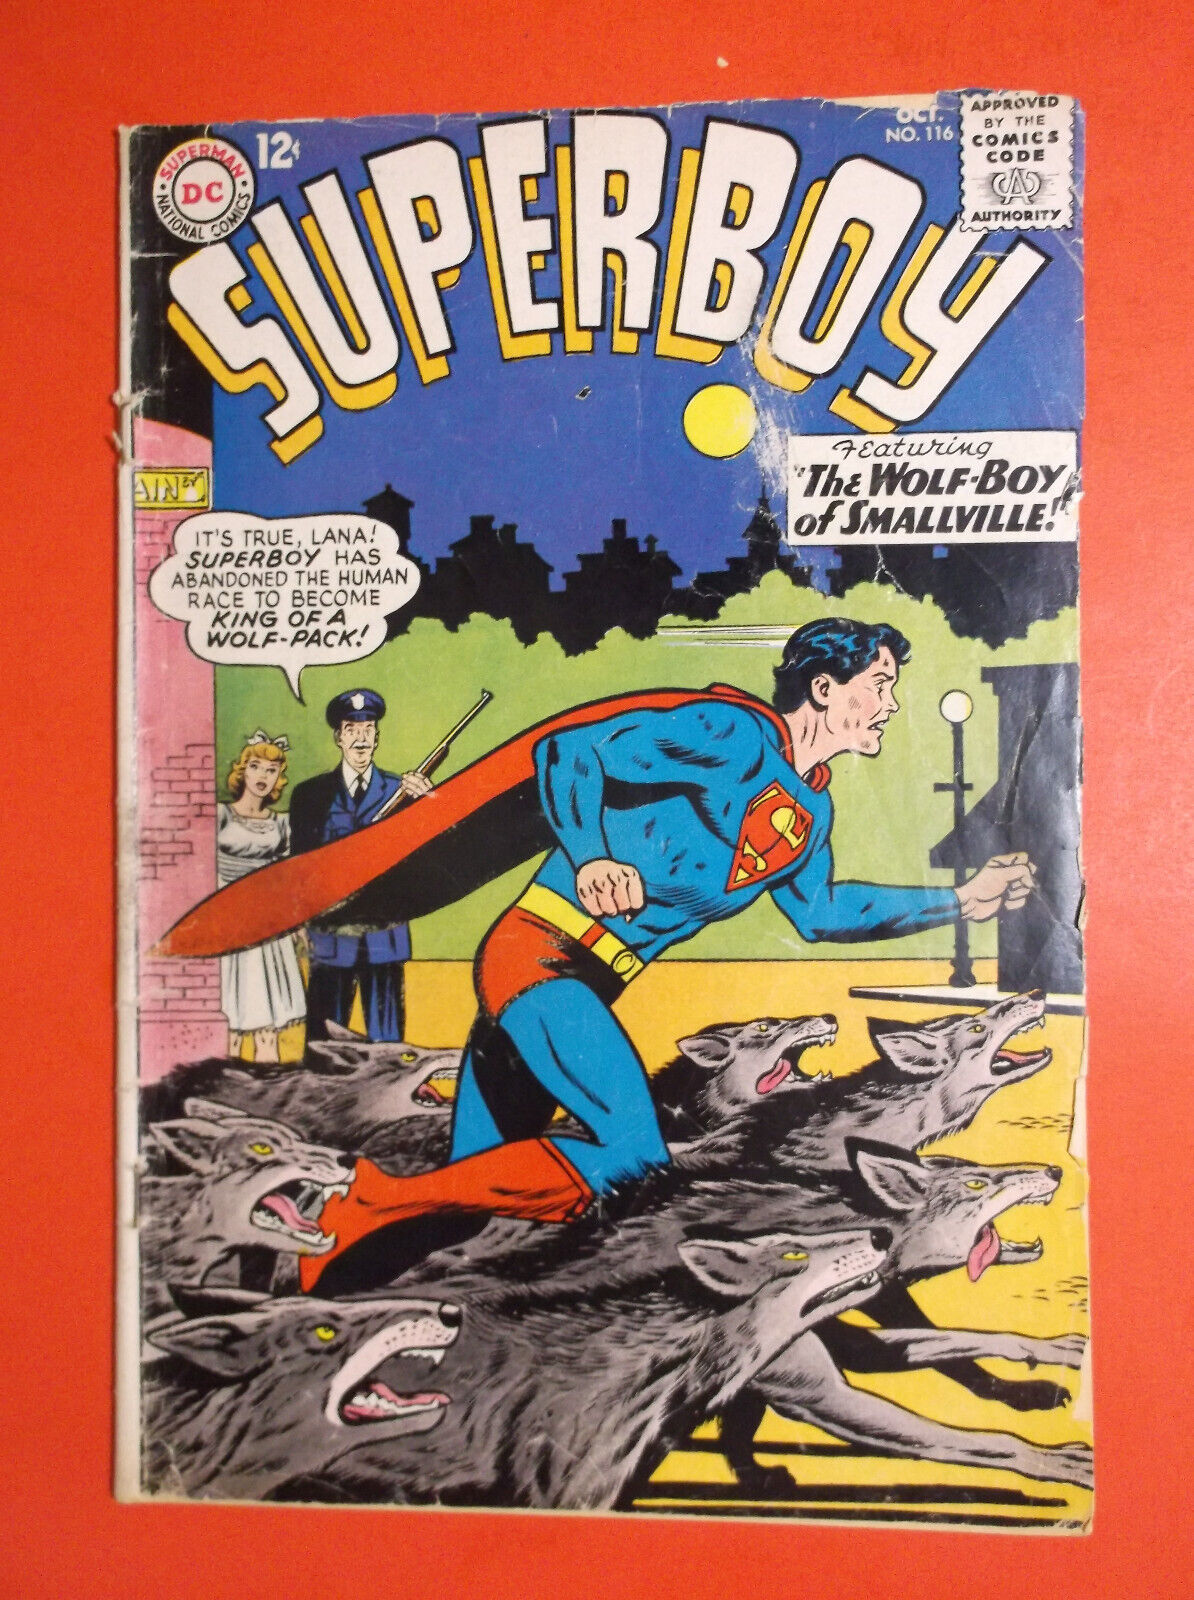 SUPERBOY # 116 - VG- 3.5 - KING OF THE WOLF-PACK - 1964 CURT SWAN COVER